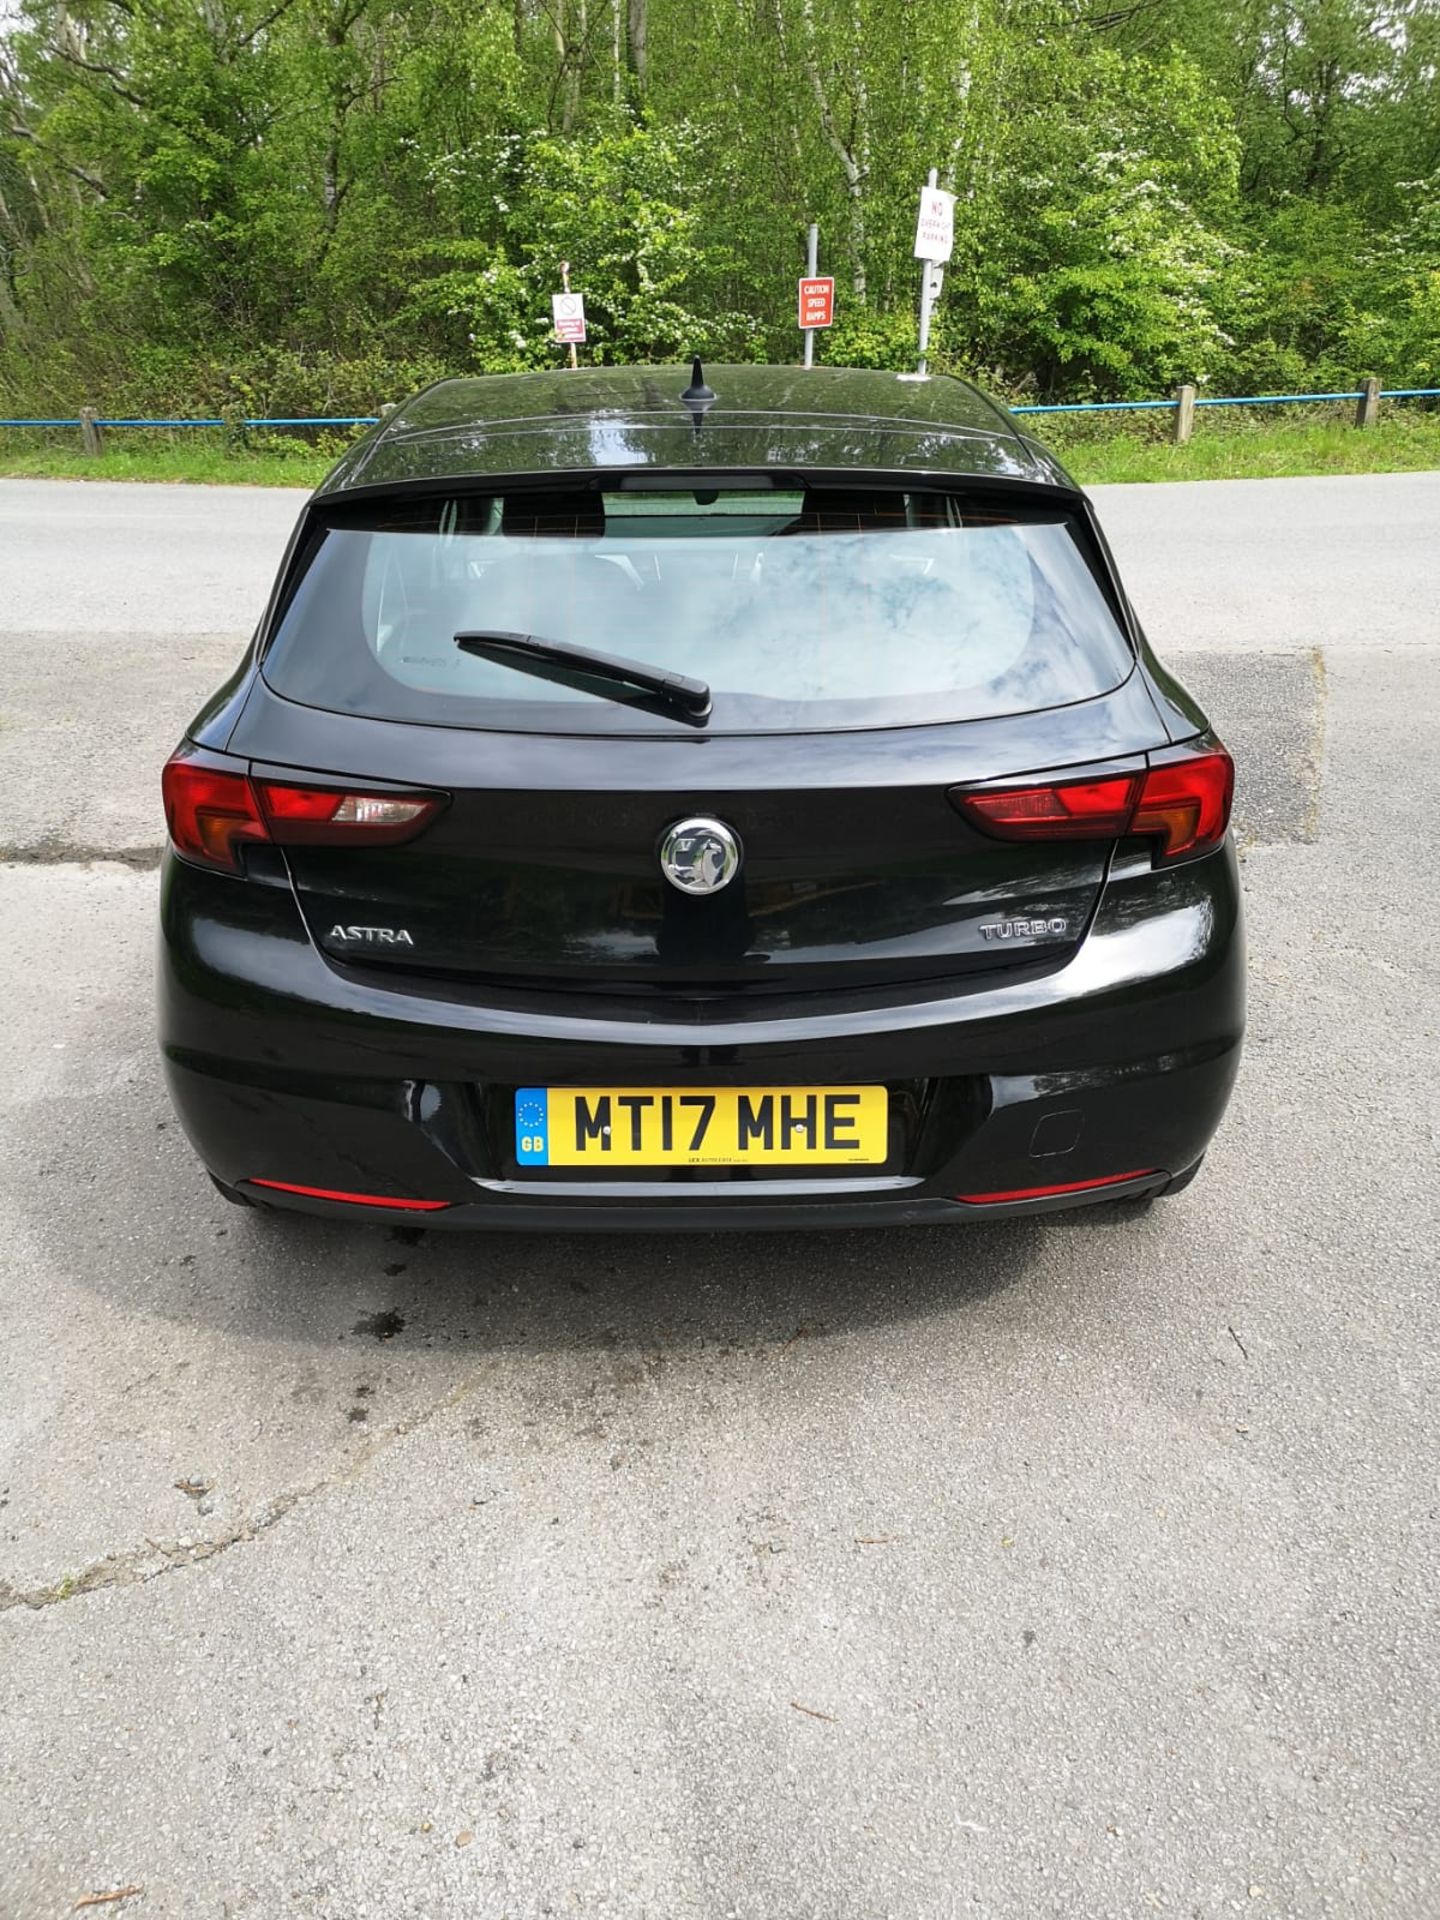 2017/17 REG VAUXHALL ASTRA TECH LINE TURBO S/S 1.4 PETROL AUTOMATIC, SHOWING 1 FORMER KEEPER - Image 5 of 14